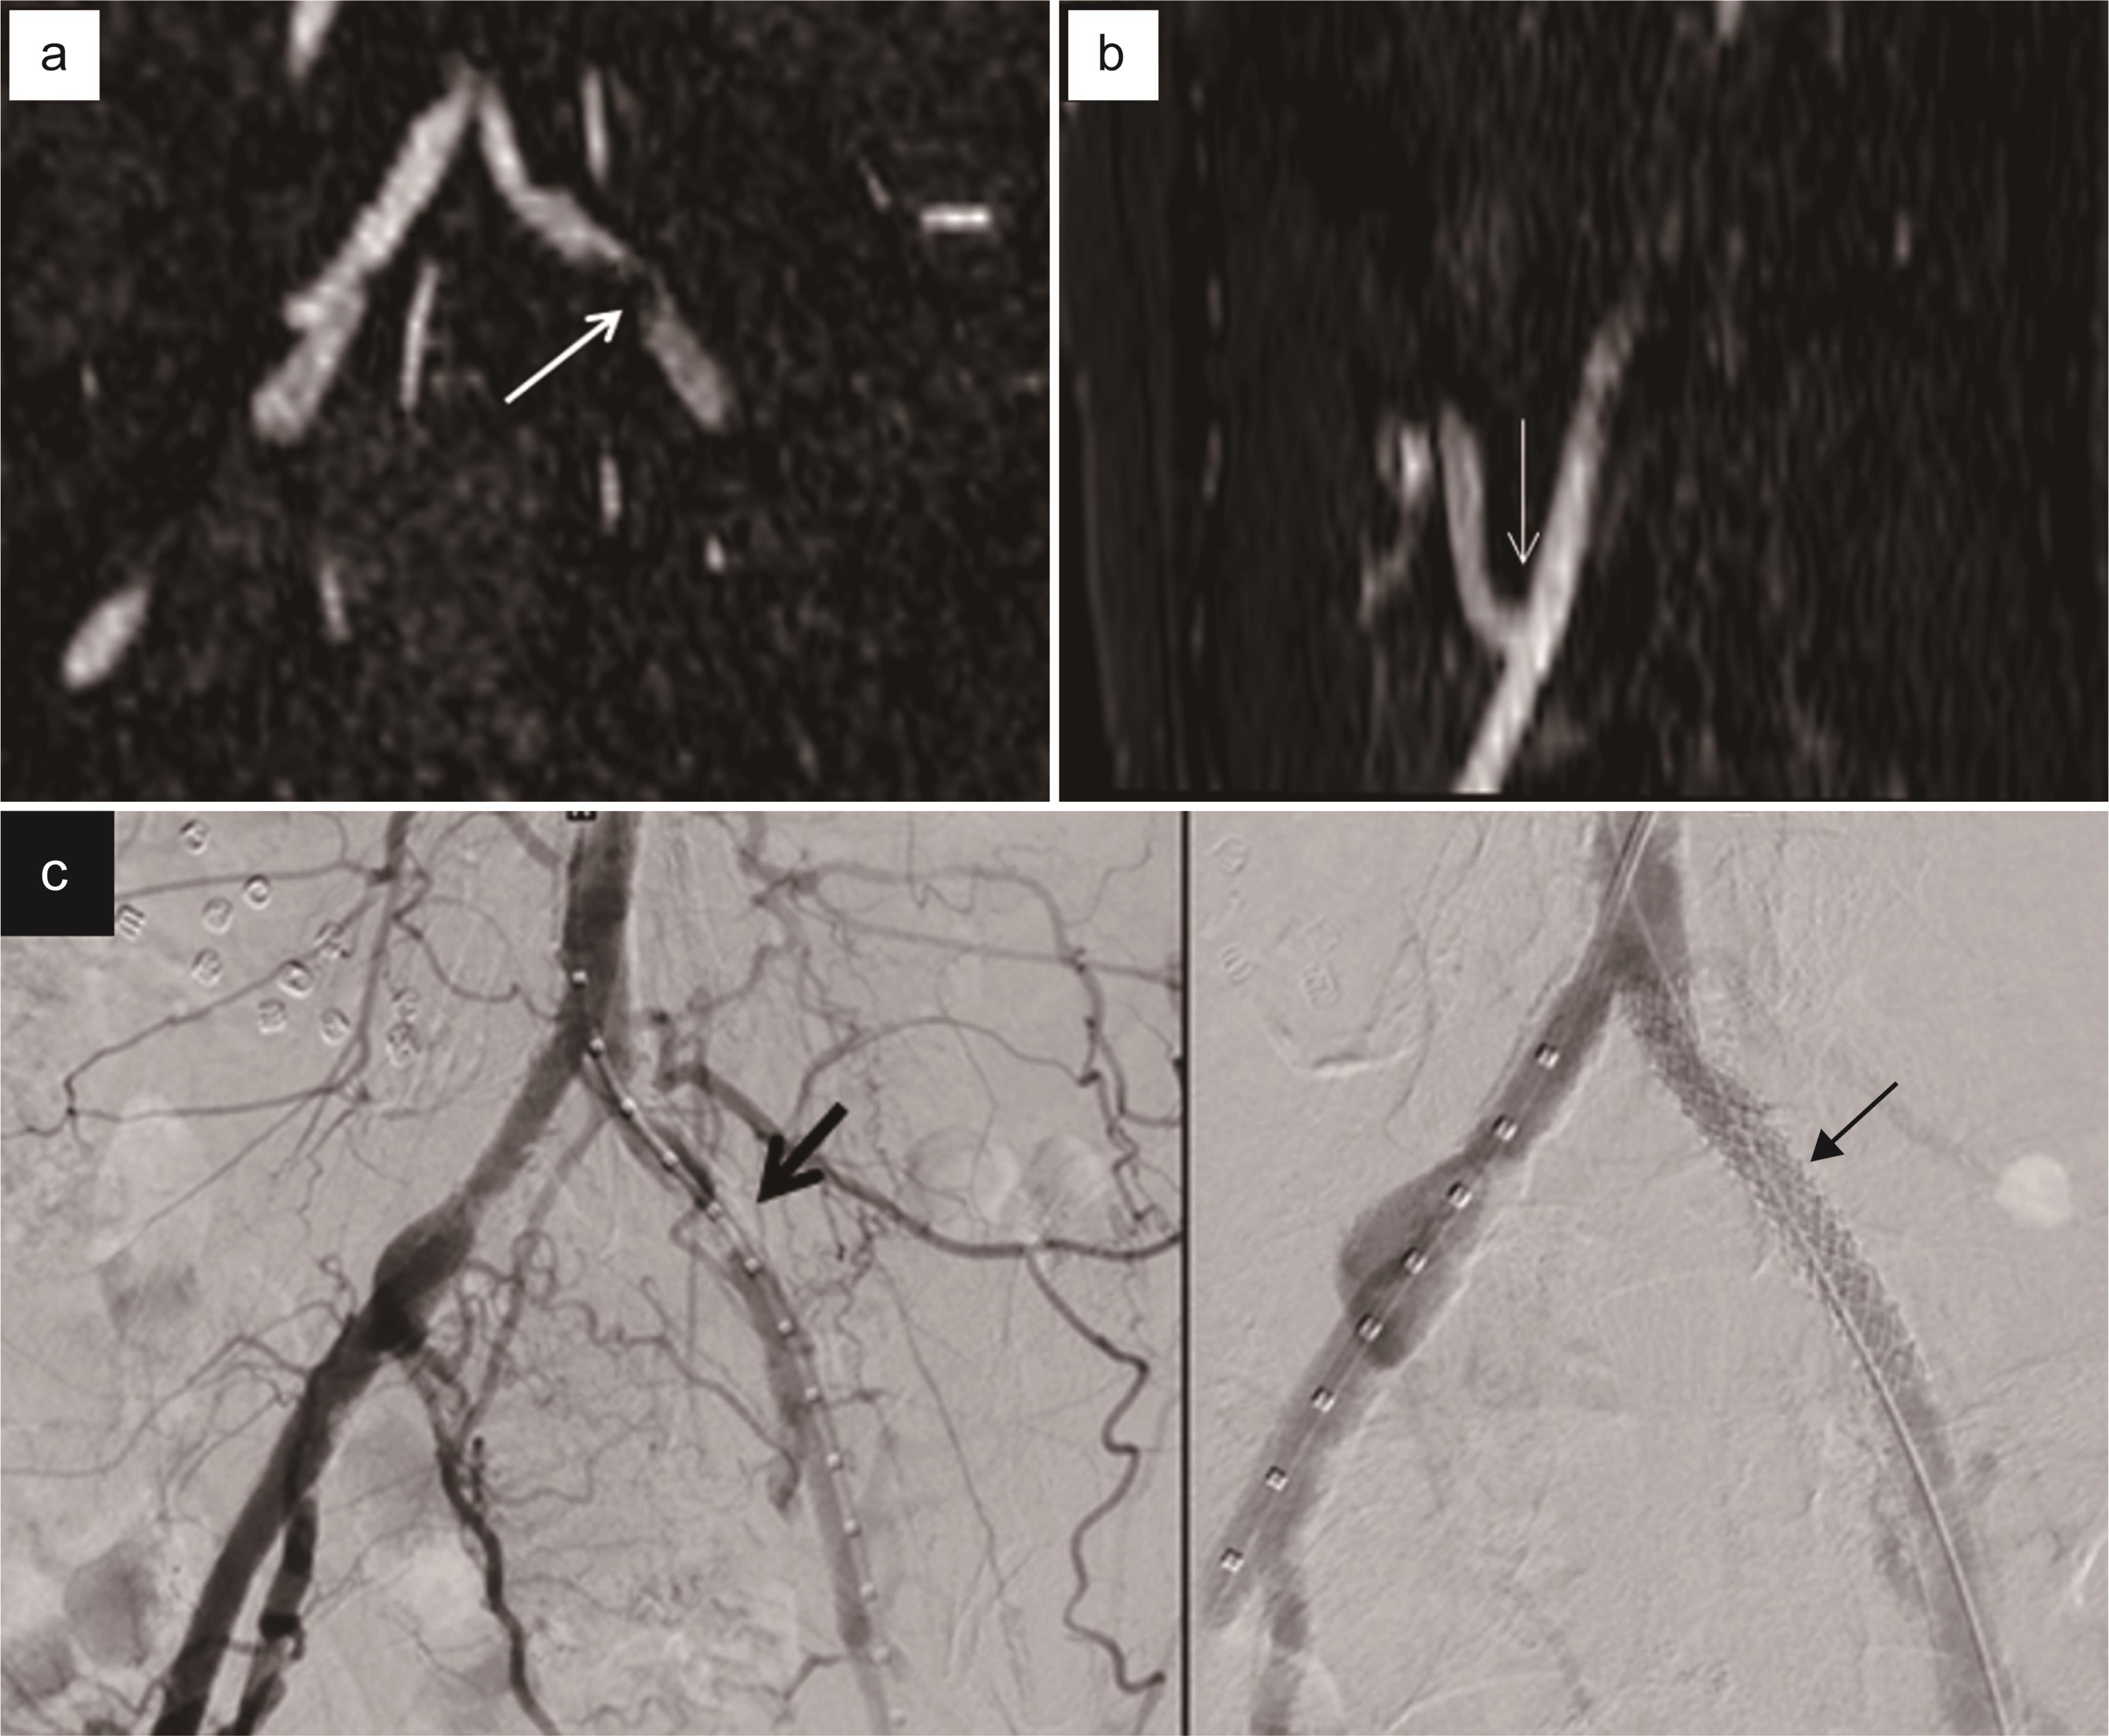 55-year-old female with left lower quadrant renal transplant in 2003 presented with transplant dysfunction (GFR = 26).